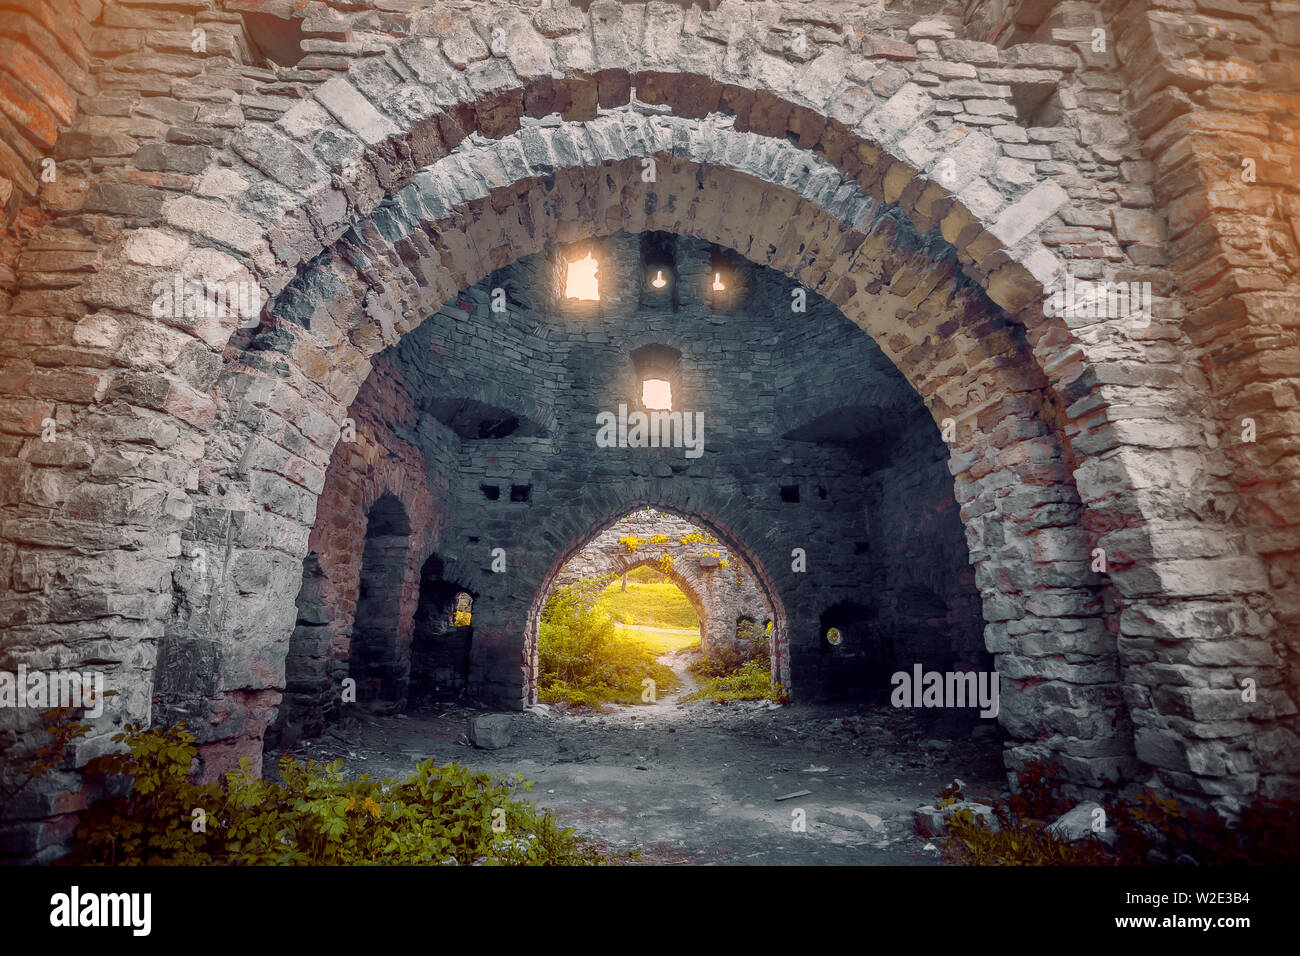 Ancient stone walls with arches and windows Stock Photo